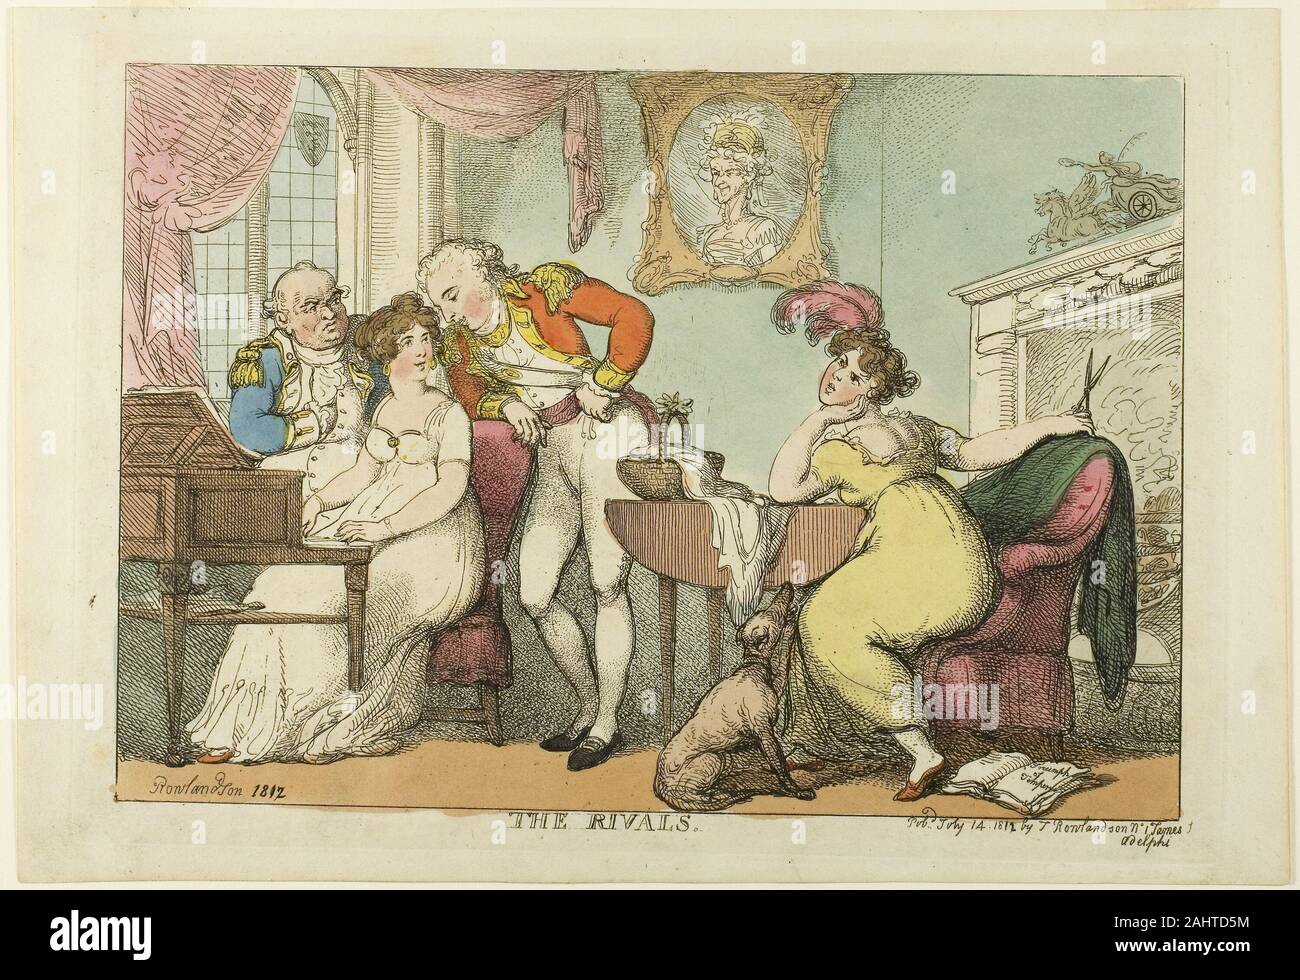 Thomas Rowlandson. The Rivals. 1812. England. Hand-colored etching and stipple engraving on ivory wove paper Stock Photo